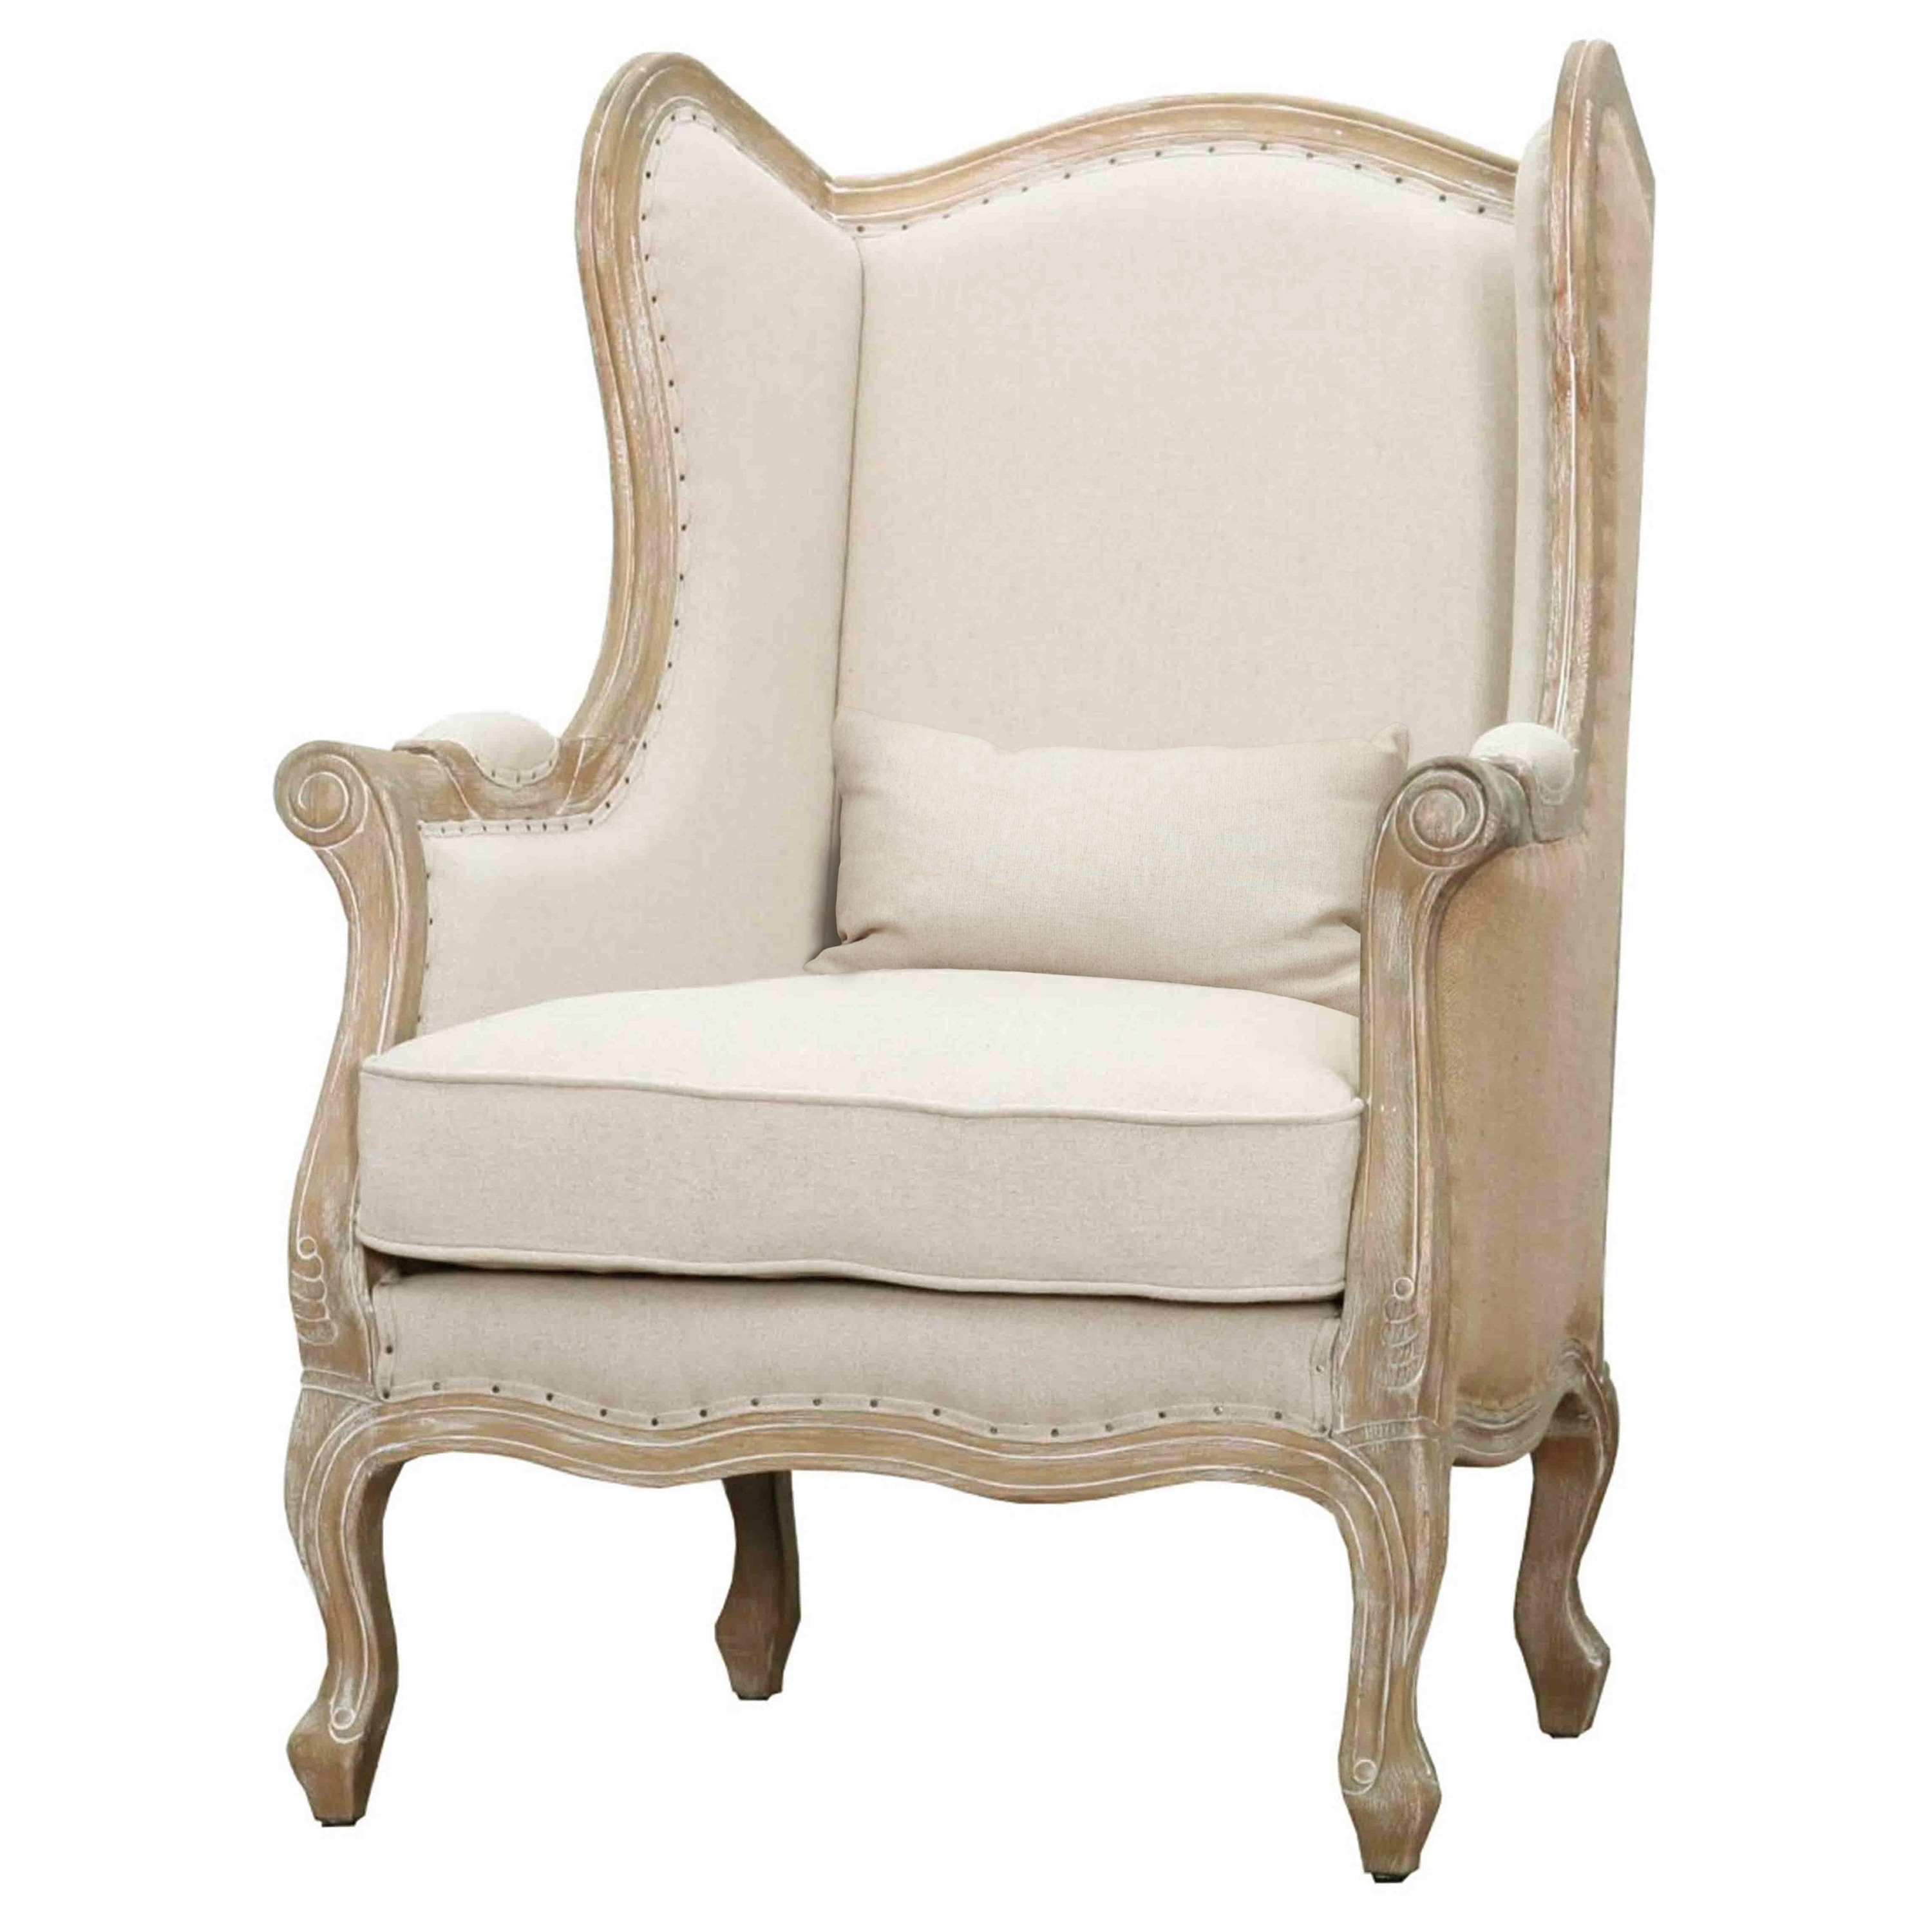 Mercer41 Button-Tufted Small Wingback Accent Chair with Rolled Arm